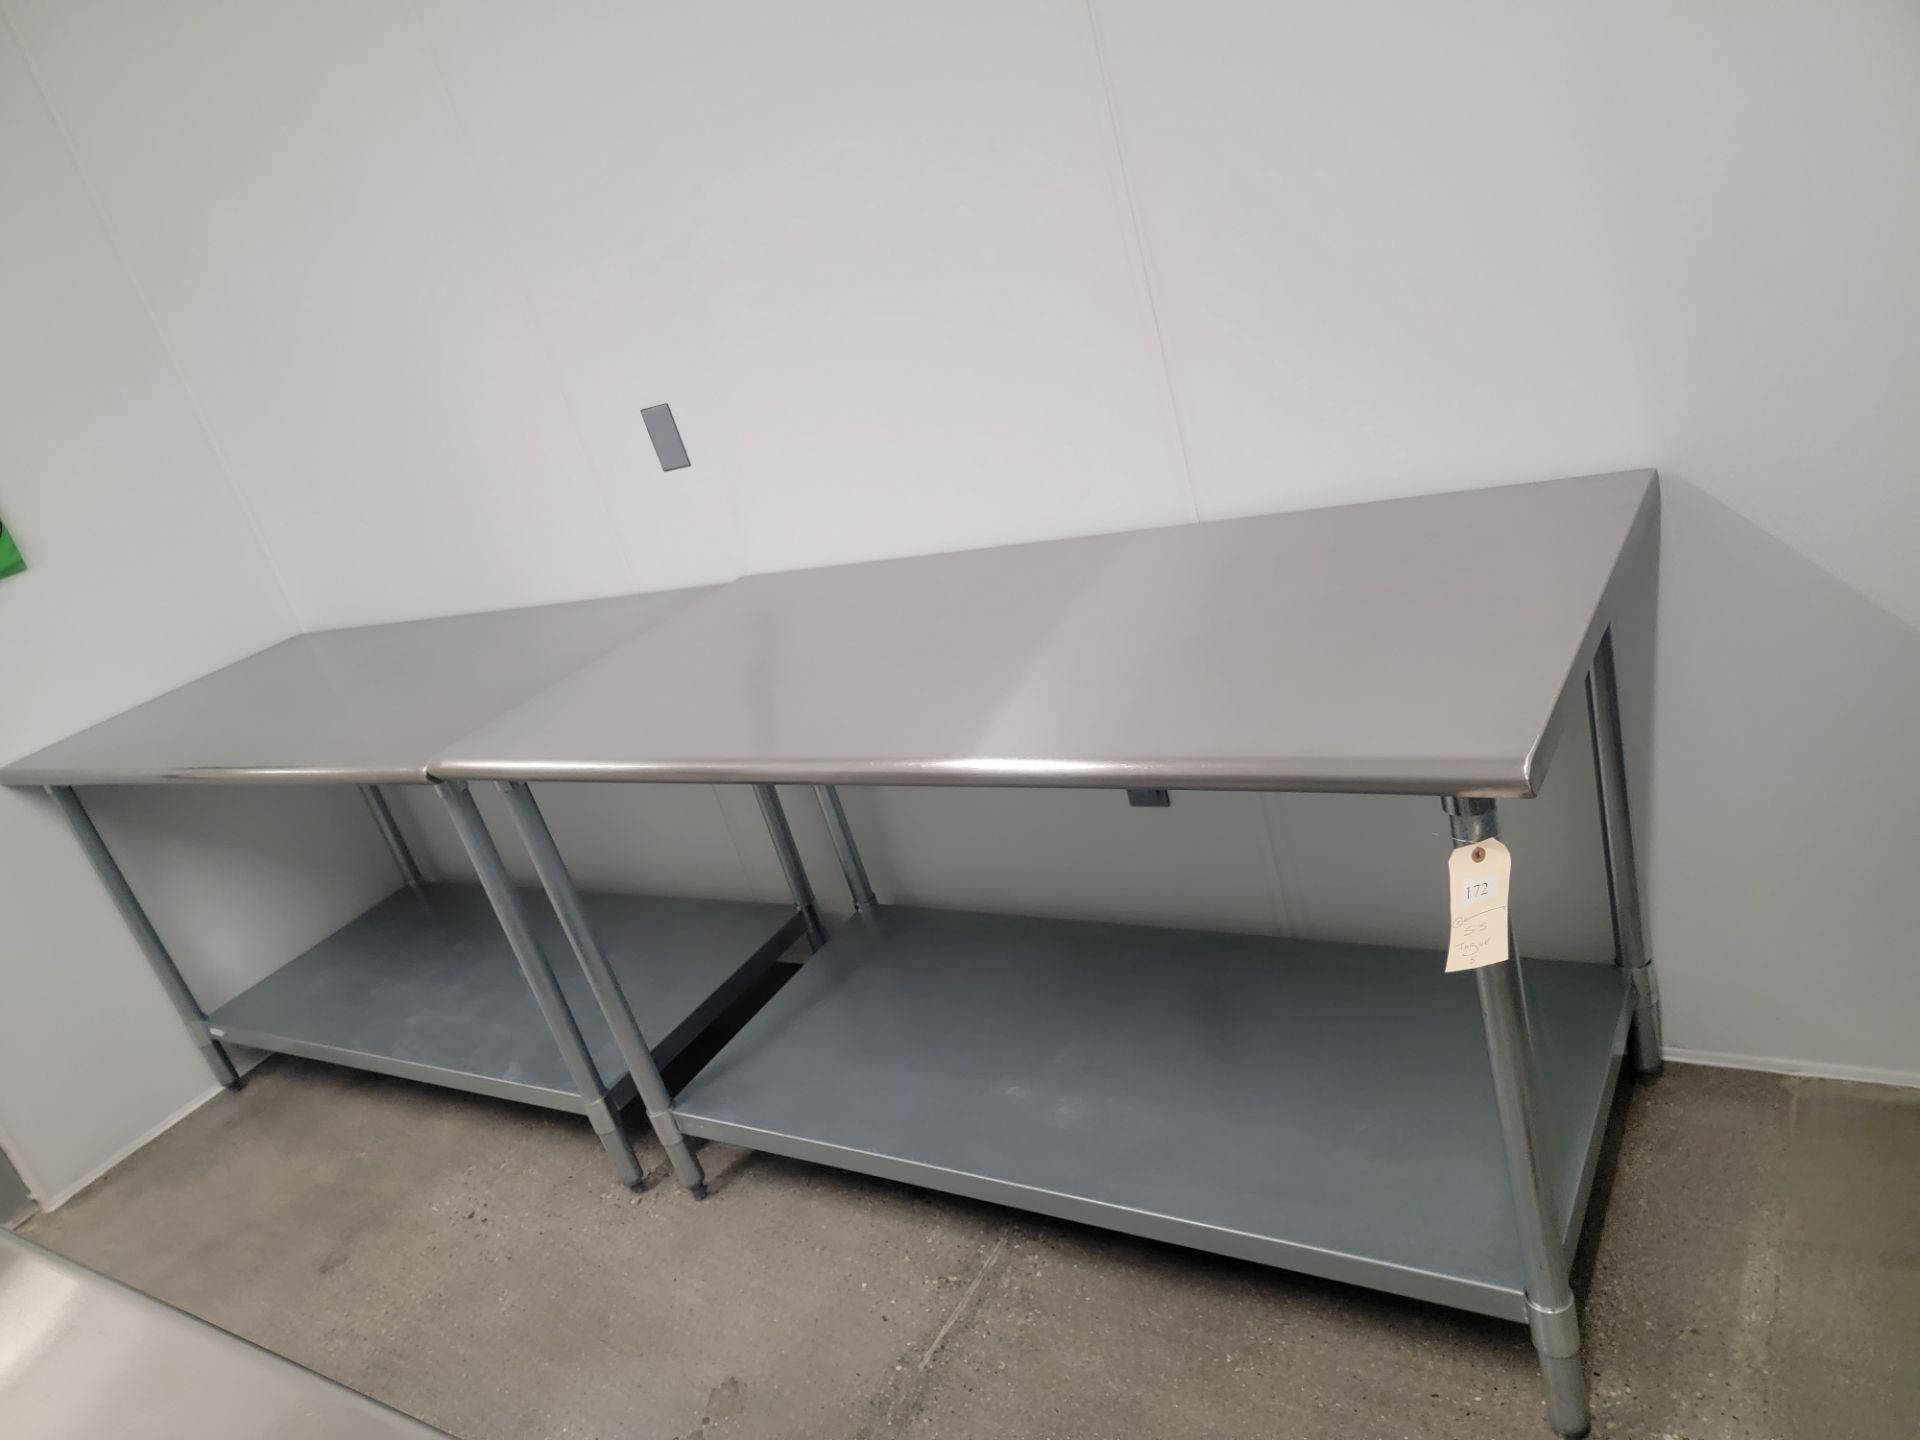 STAINLESS STEEL TABLES 5'